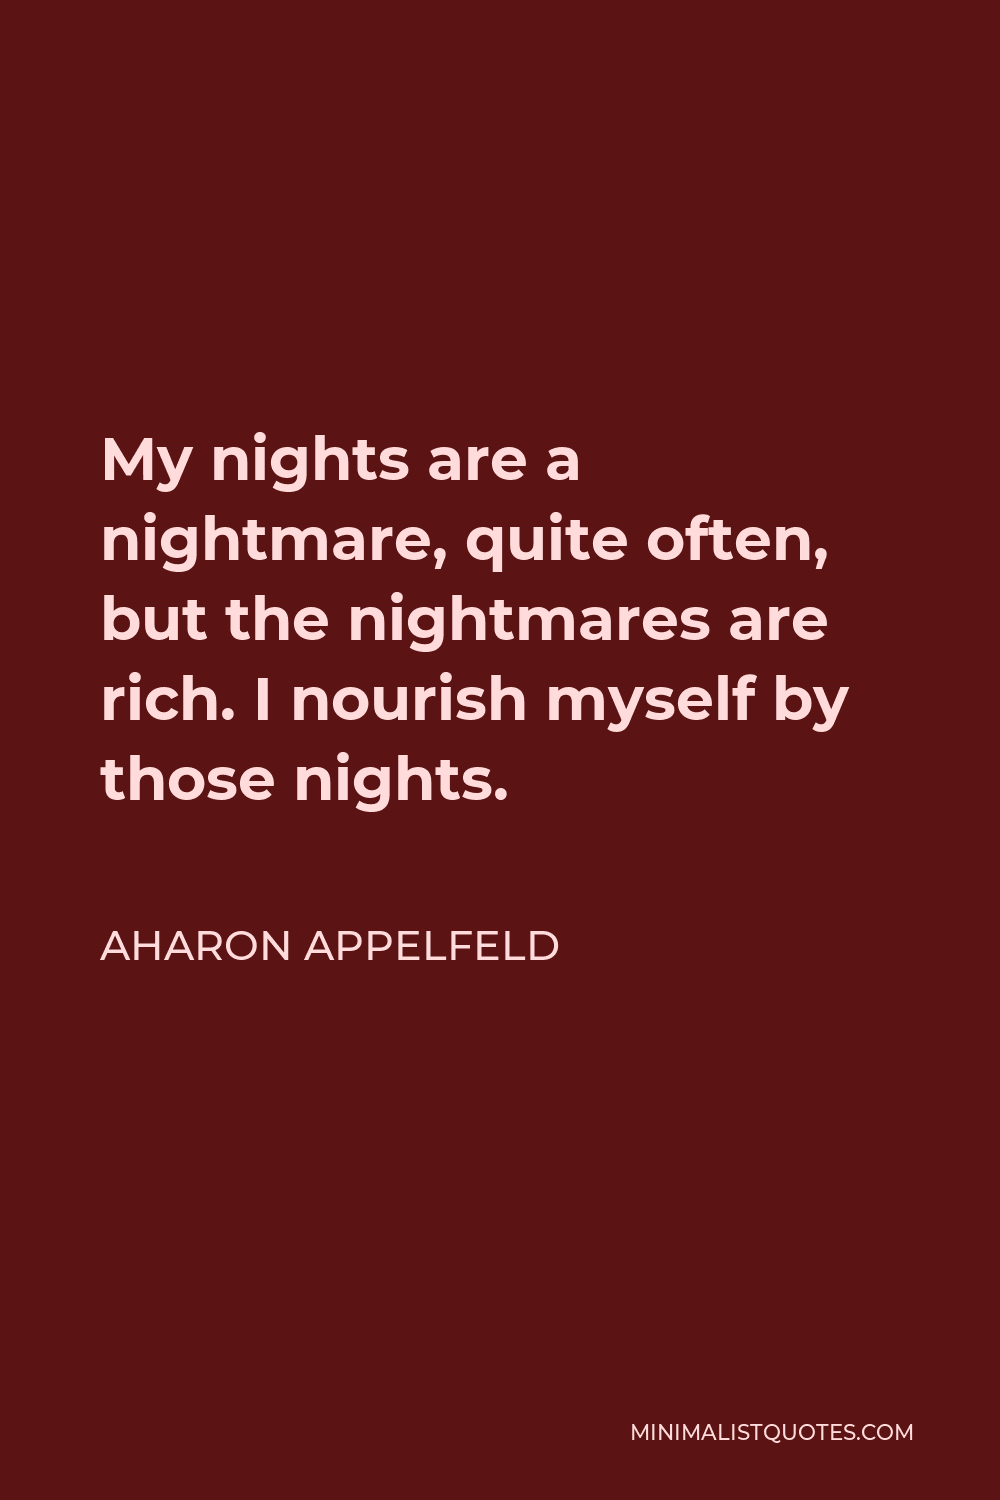 Aharon Appelfeld Quote - My nights are a nightmare, quite often, but the nightmares are rich. I nourish myself by those nights.